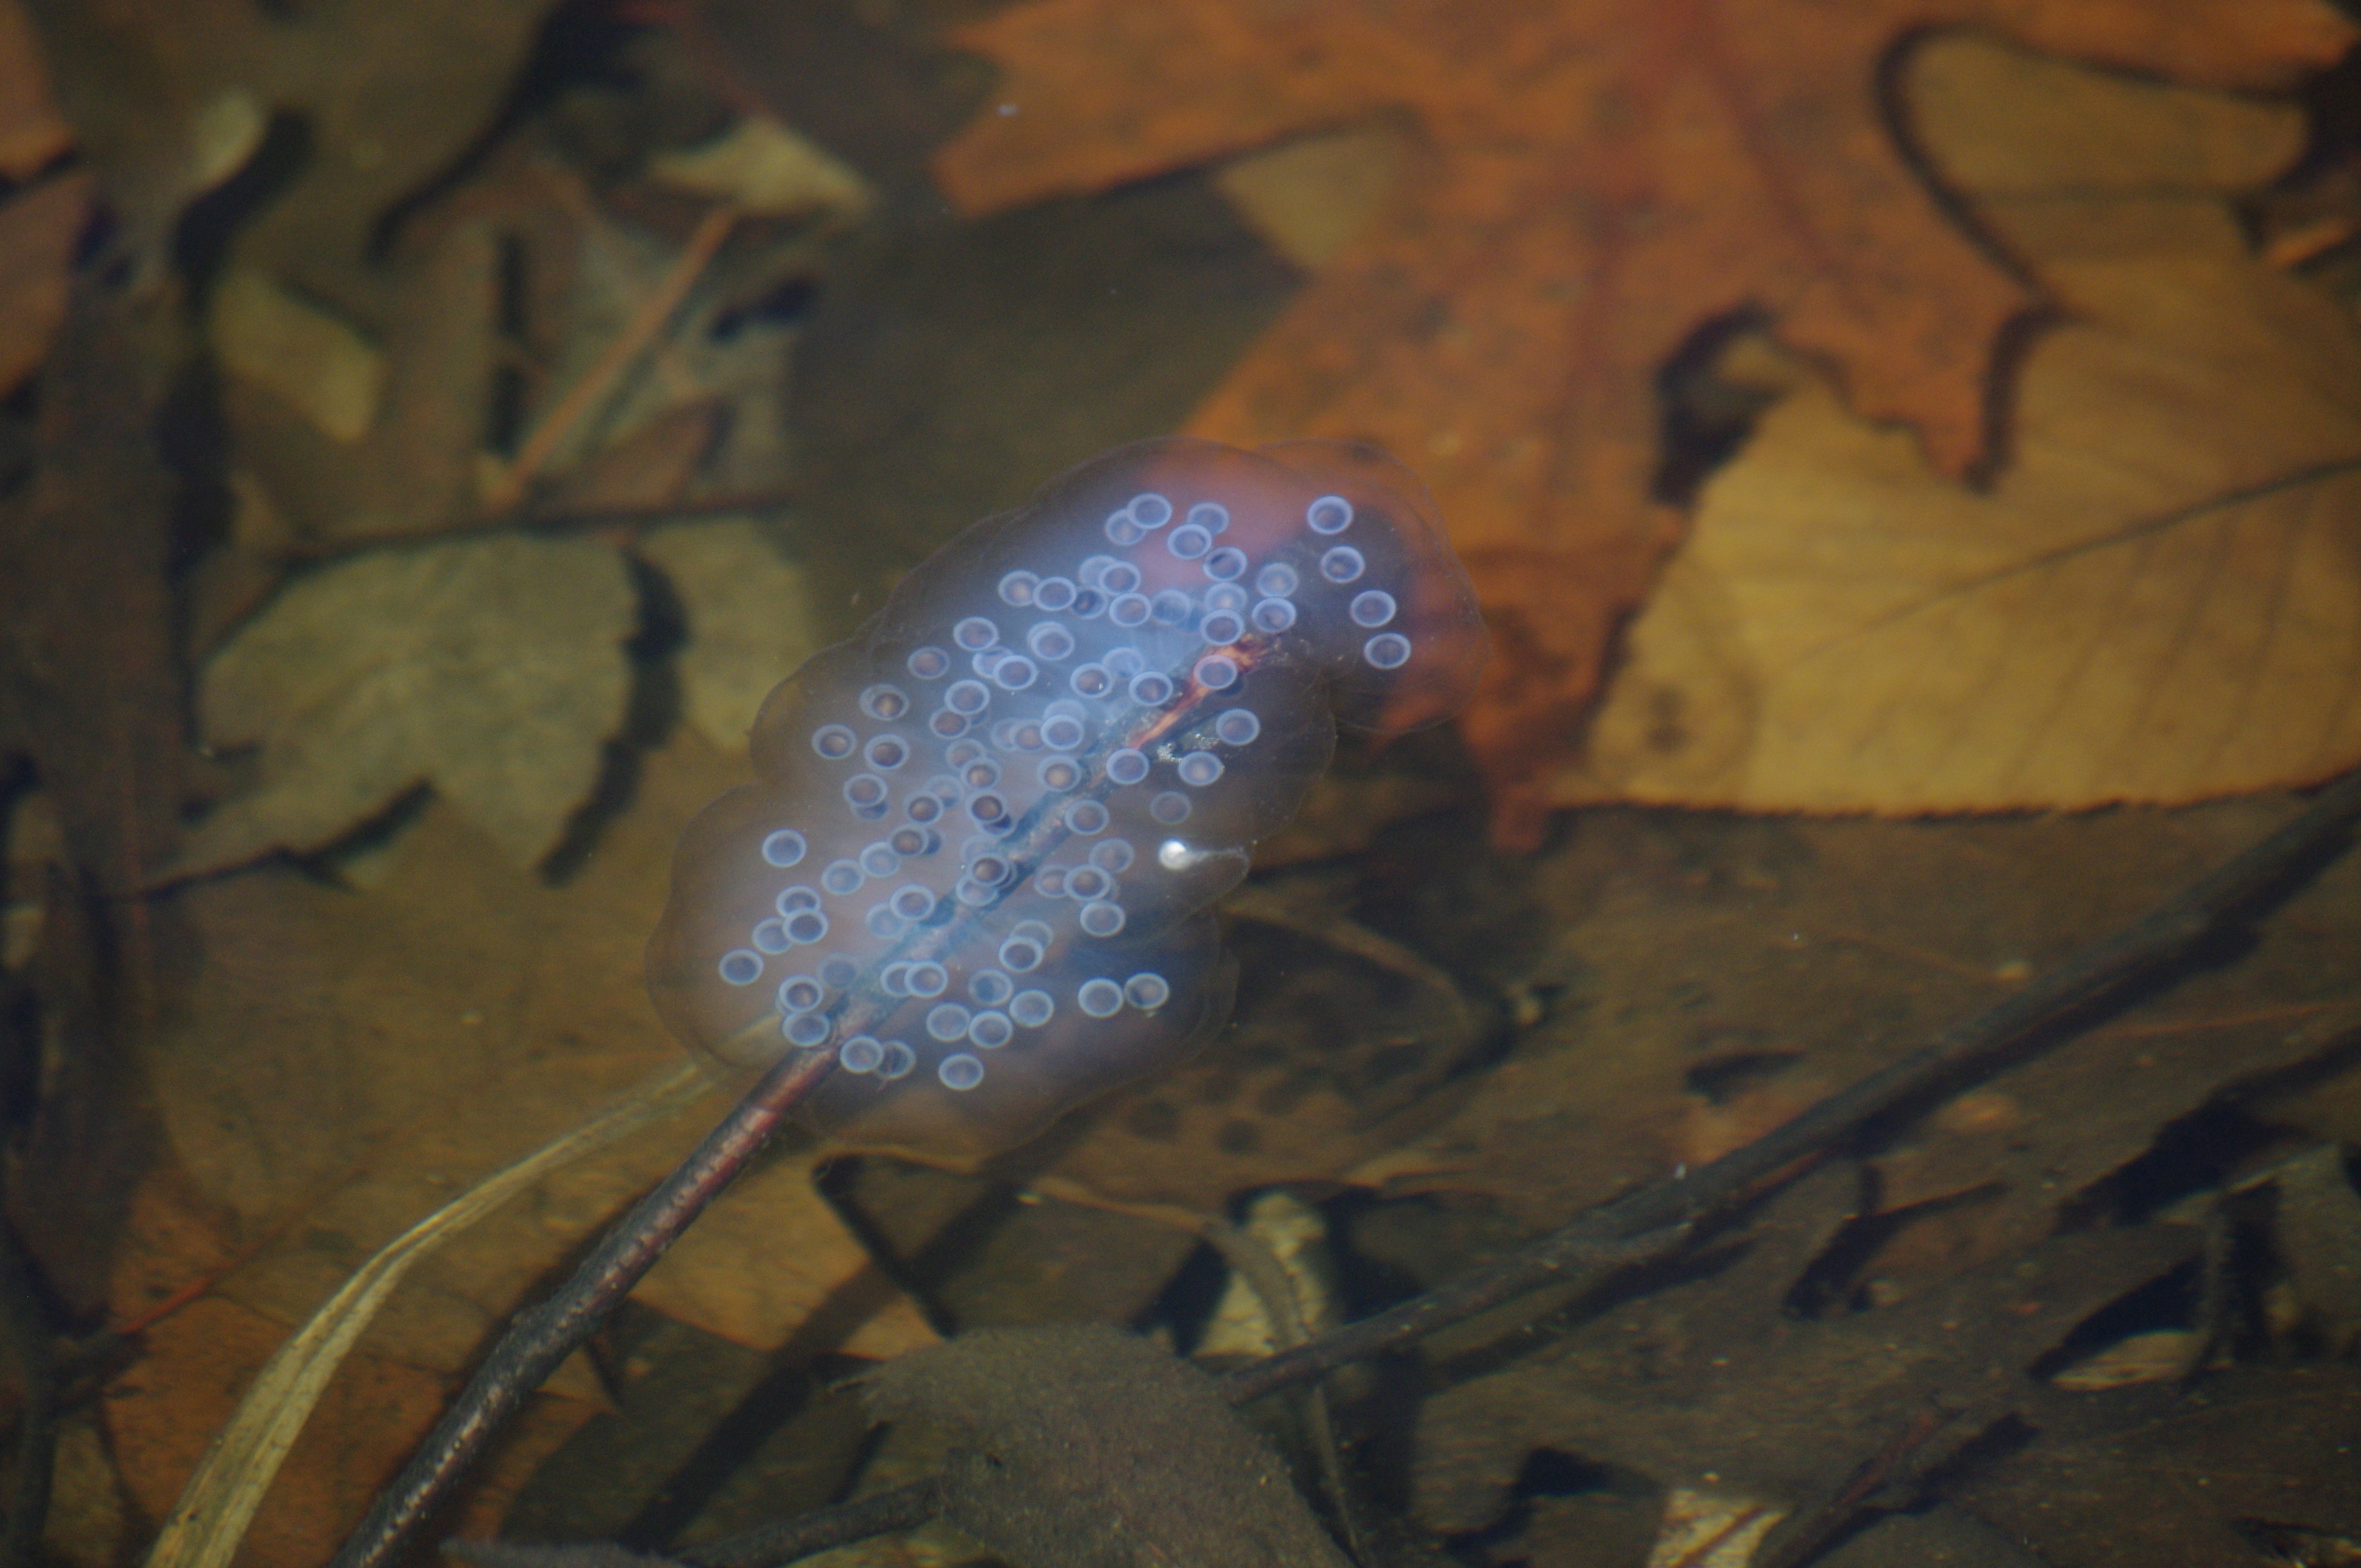 a mass of translucent white eggs with dark centers attached to a stick in the water